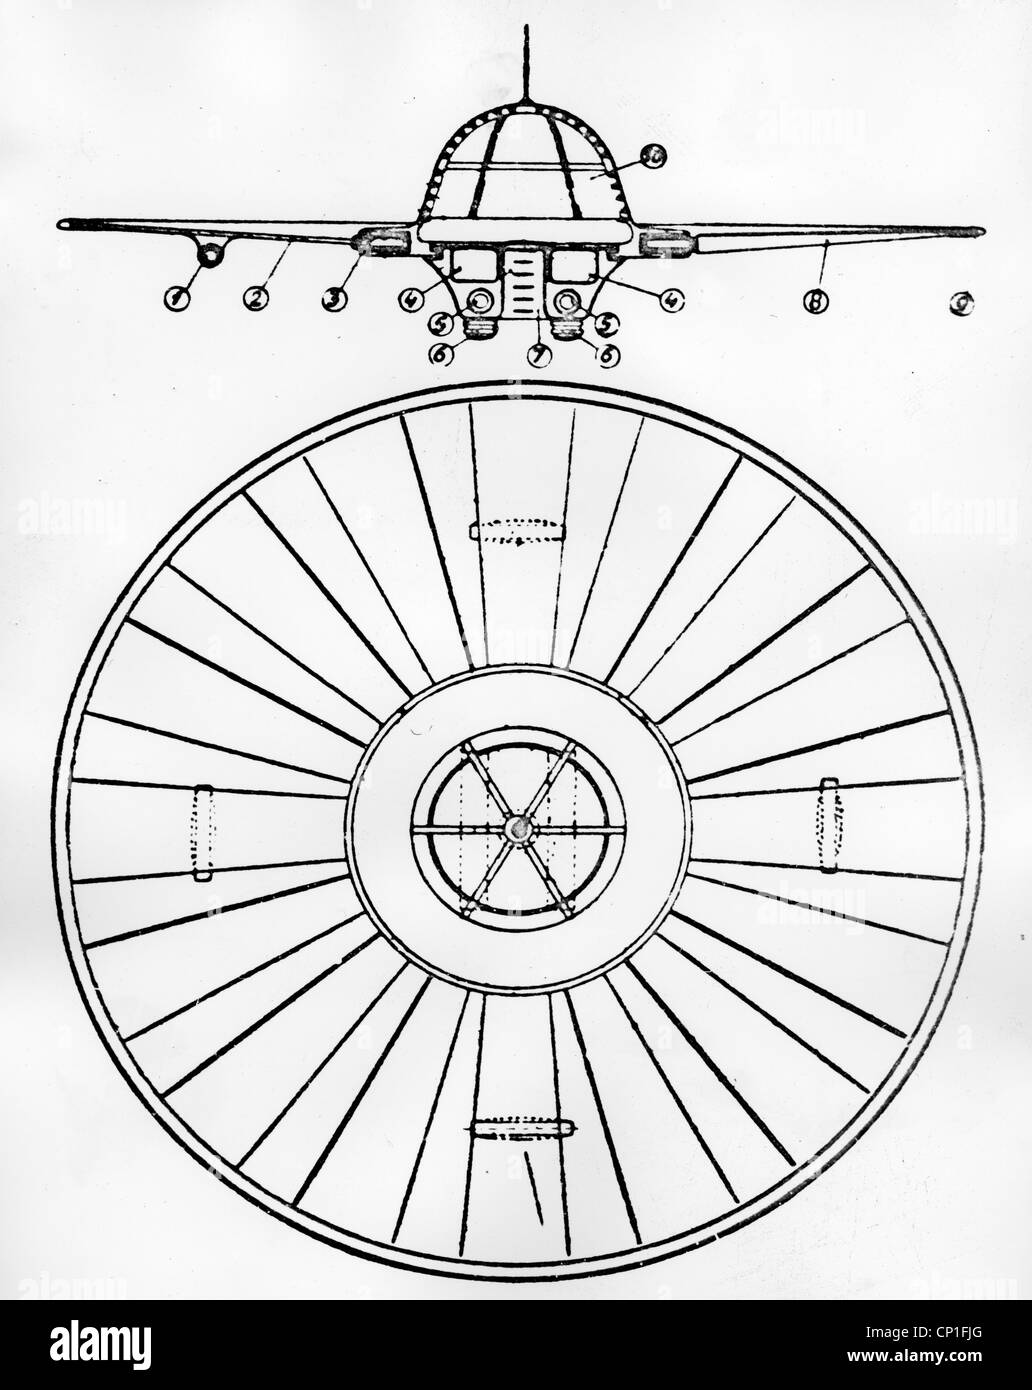 astronautics, UFOs, flying disk, designed by Schriewer, cross section and top view, drawing, from the book 'Die deutschen Waffen und Geheimwaffen des 2. Weltkrieges und ihre Weiterentwicklung' (The German weapons and secret weapons of World War Two and their further development), by Rudolf Lusar, 2nd edition, J.F. Lehmanns publishing, Munich, Germany, 1958, Additional-Rights-Clearences-Not Available Stock Photo